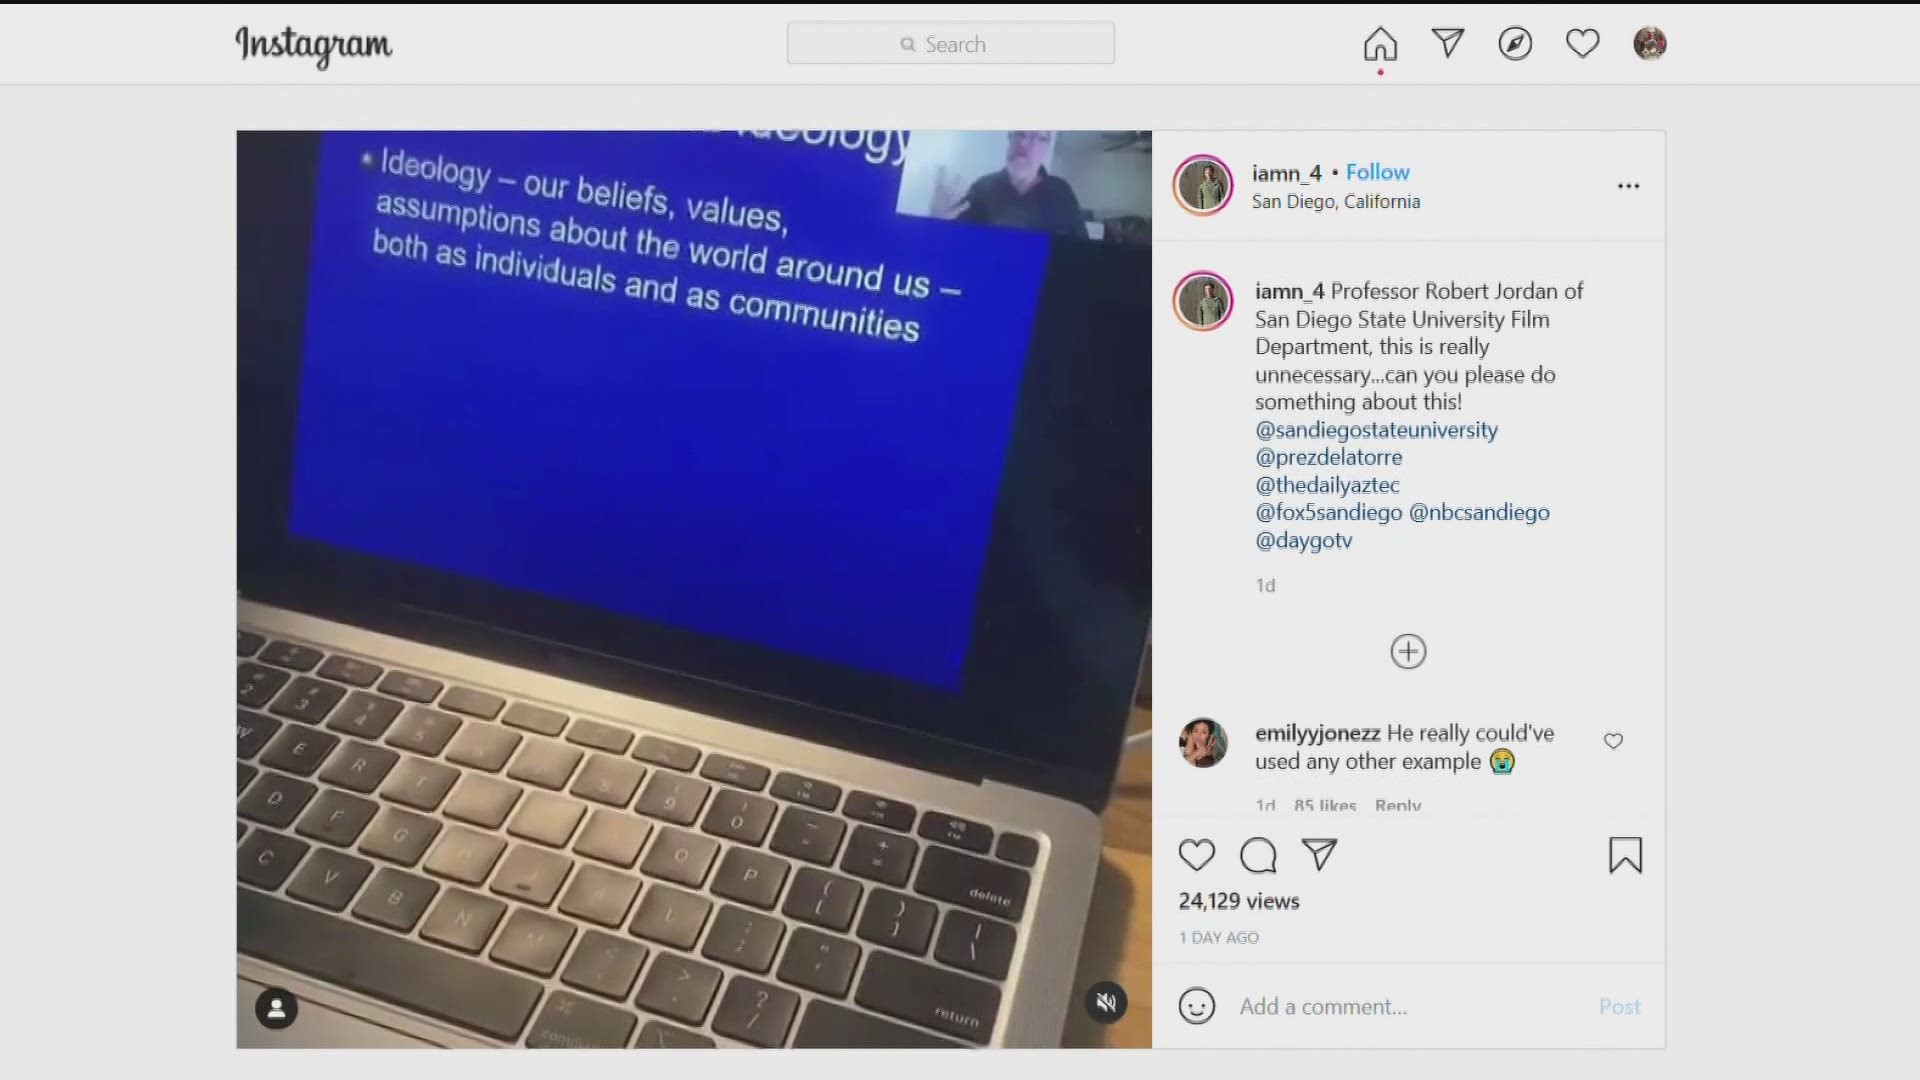 A video clip has gone viral on social media after the professor made comments some viewed as racist